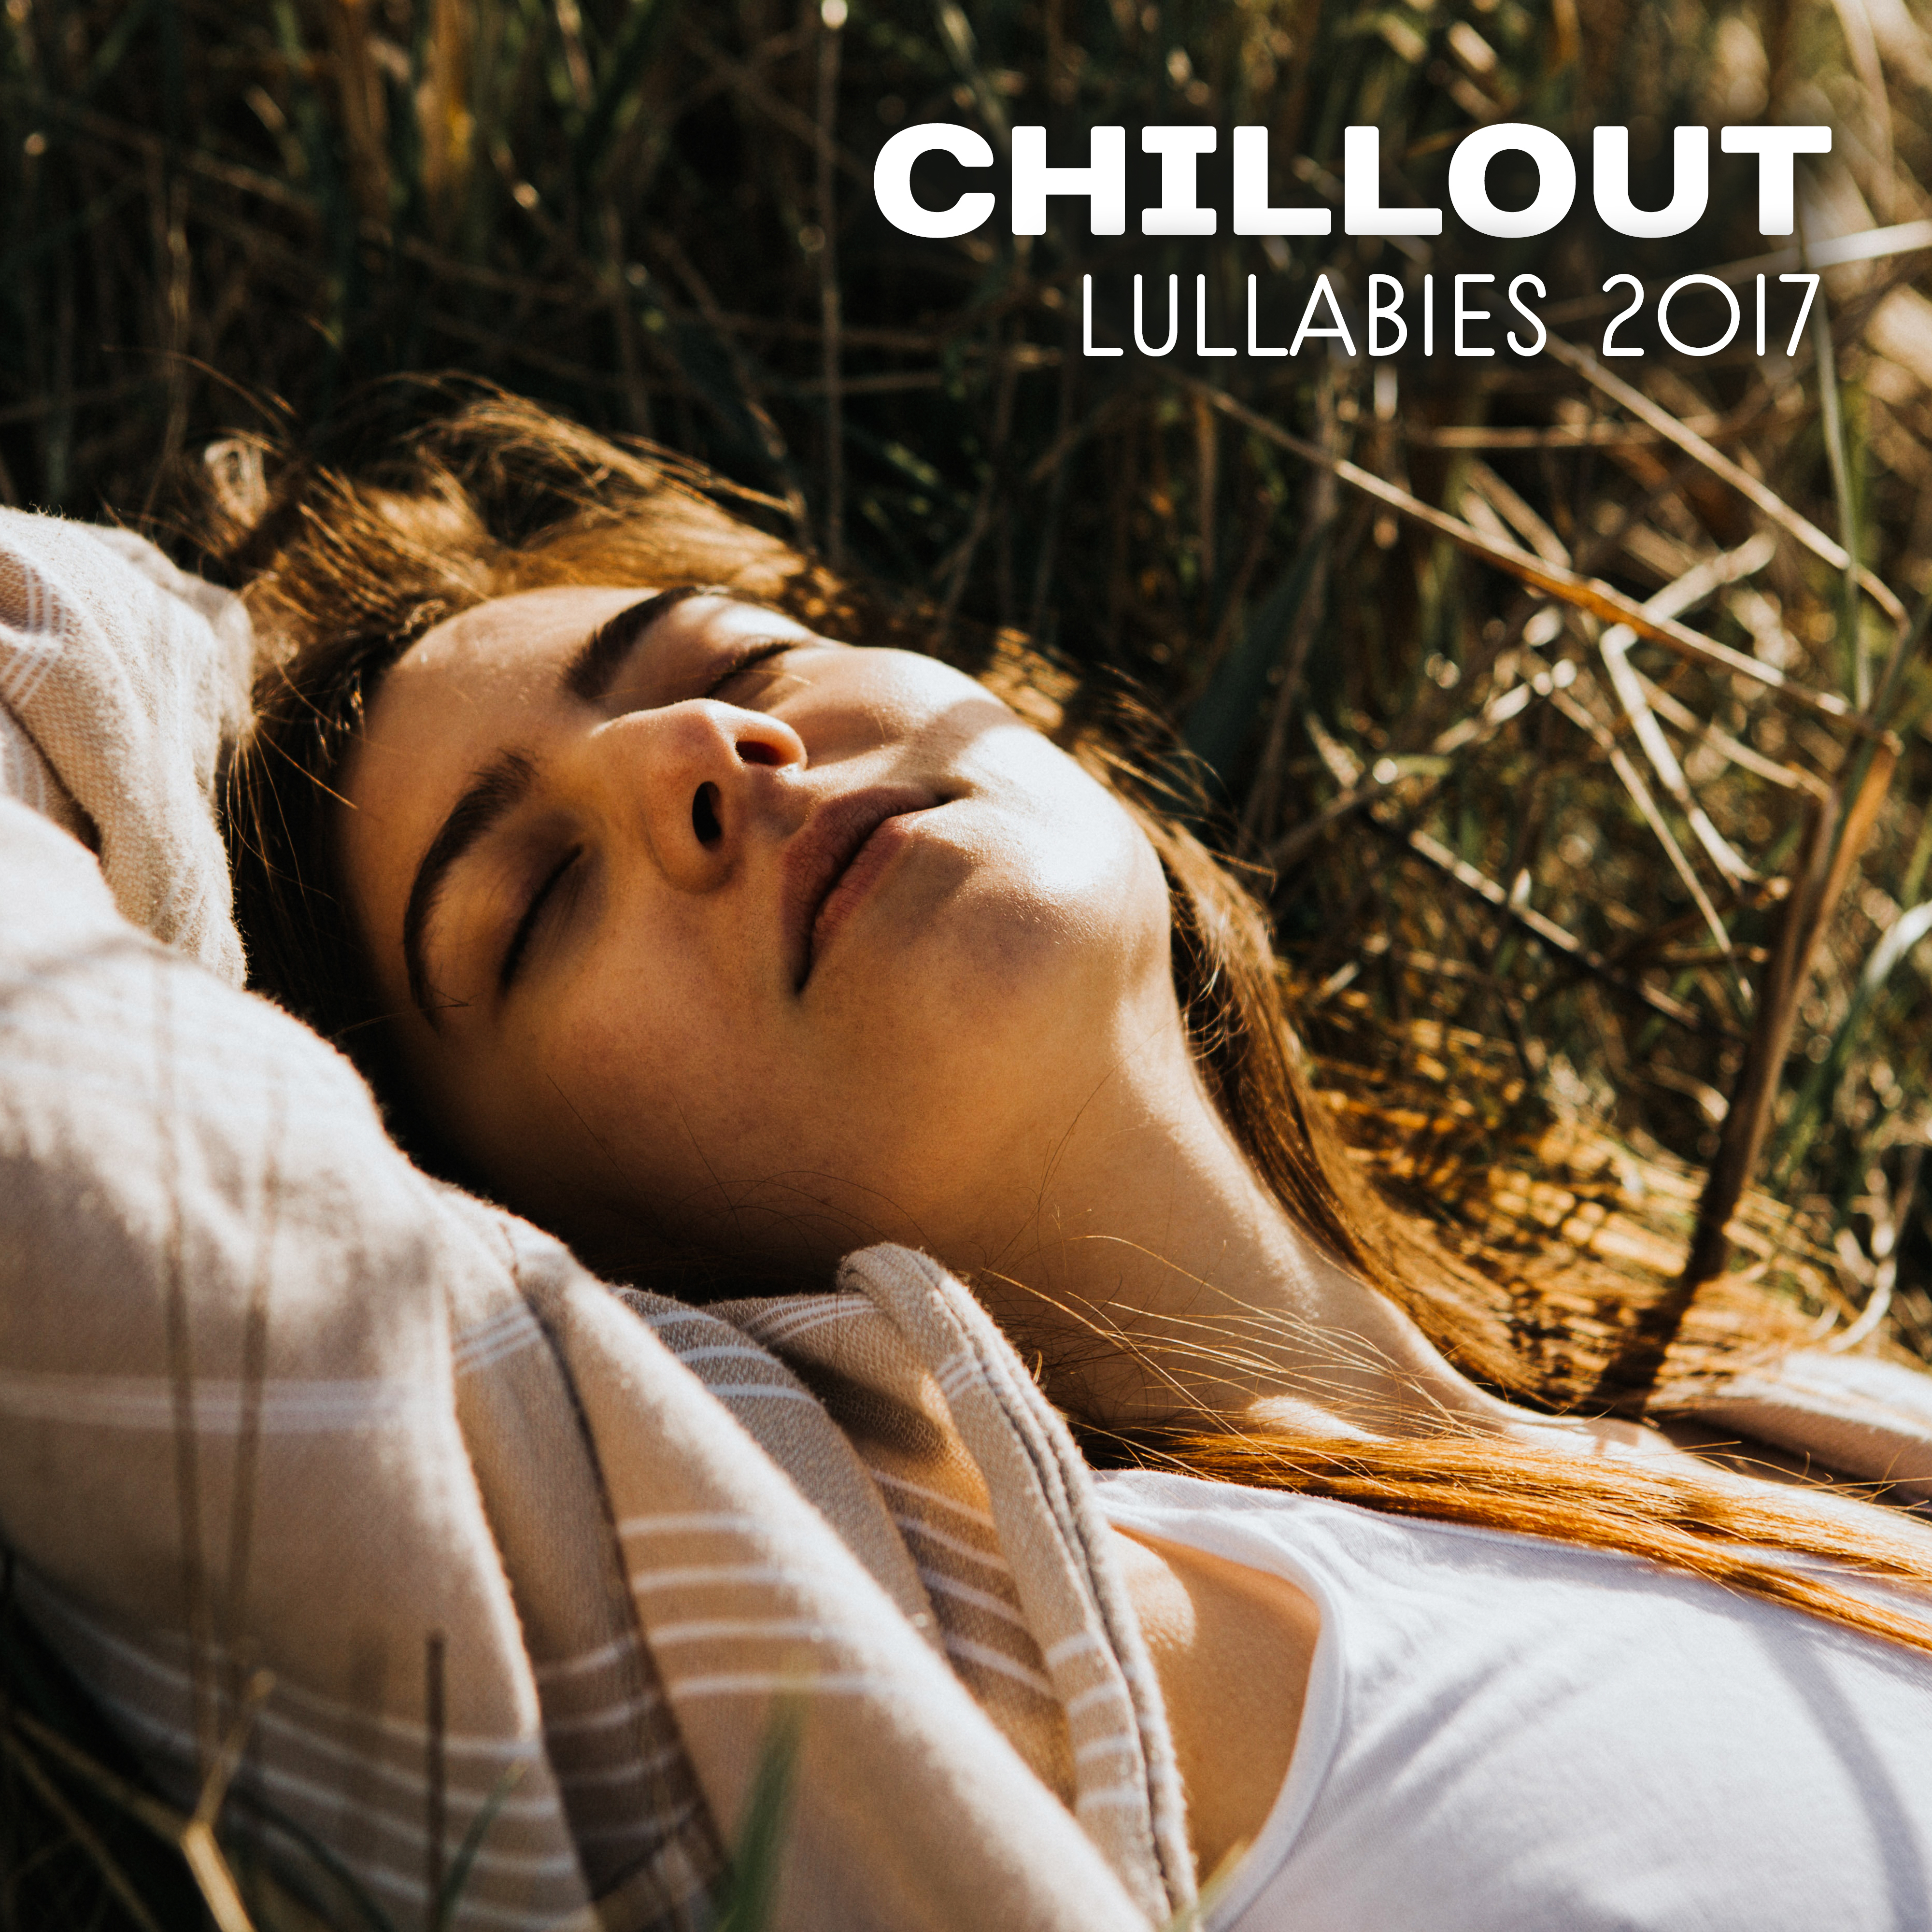 Chillout Lullaby